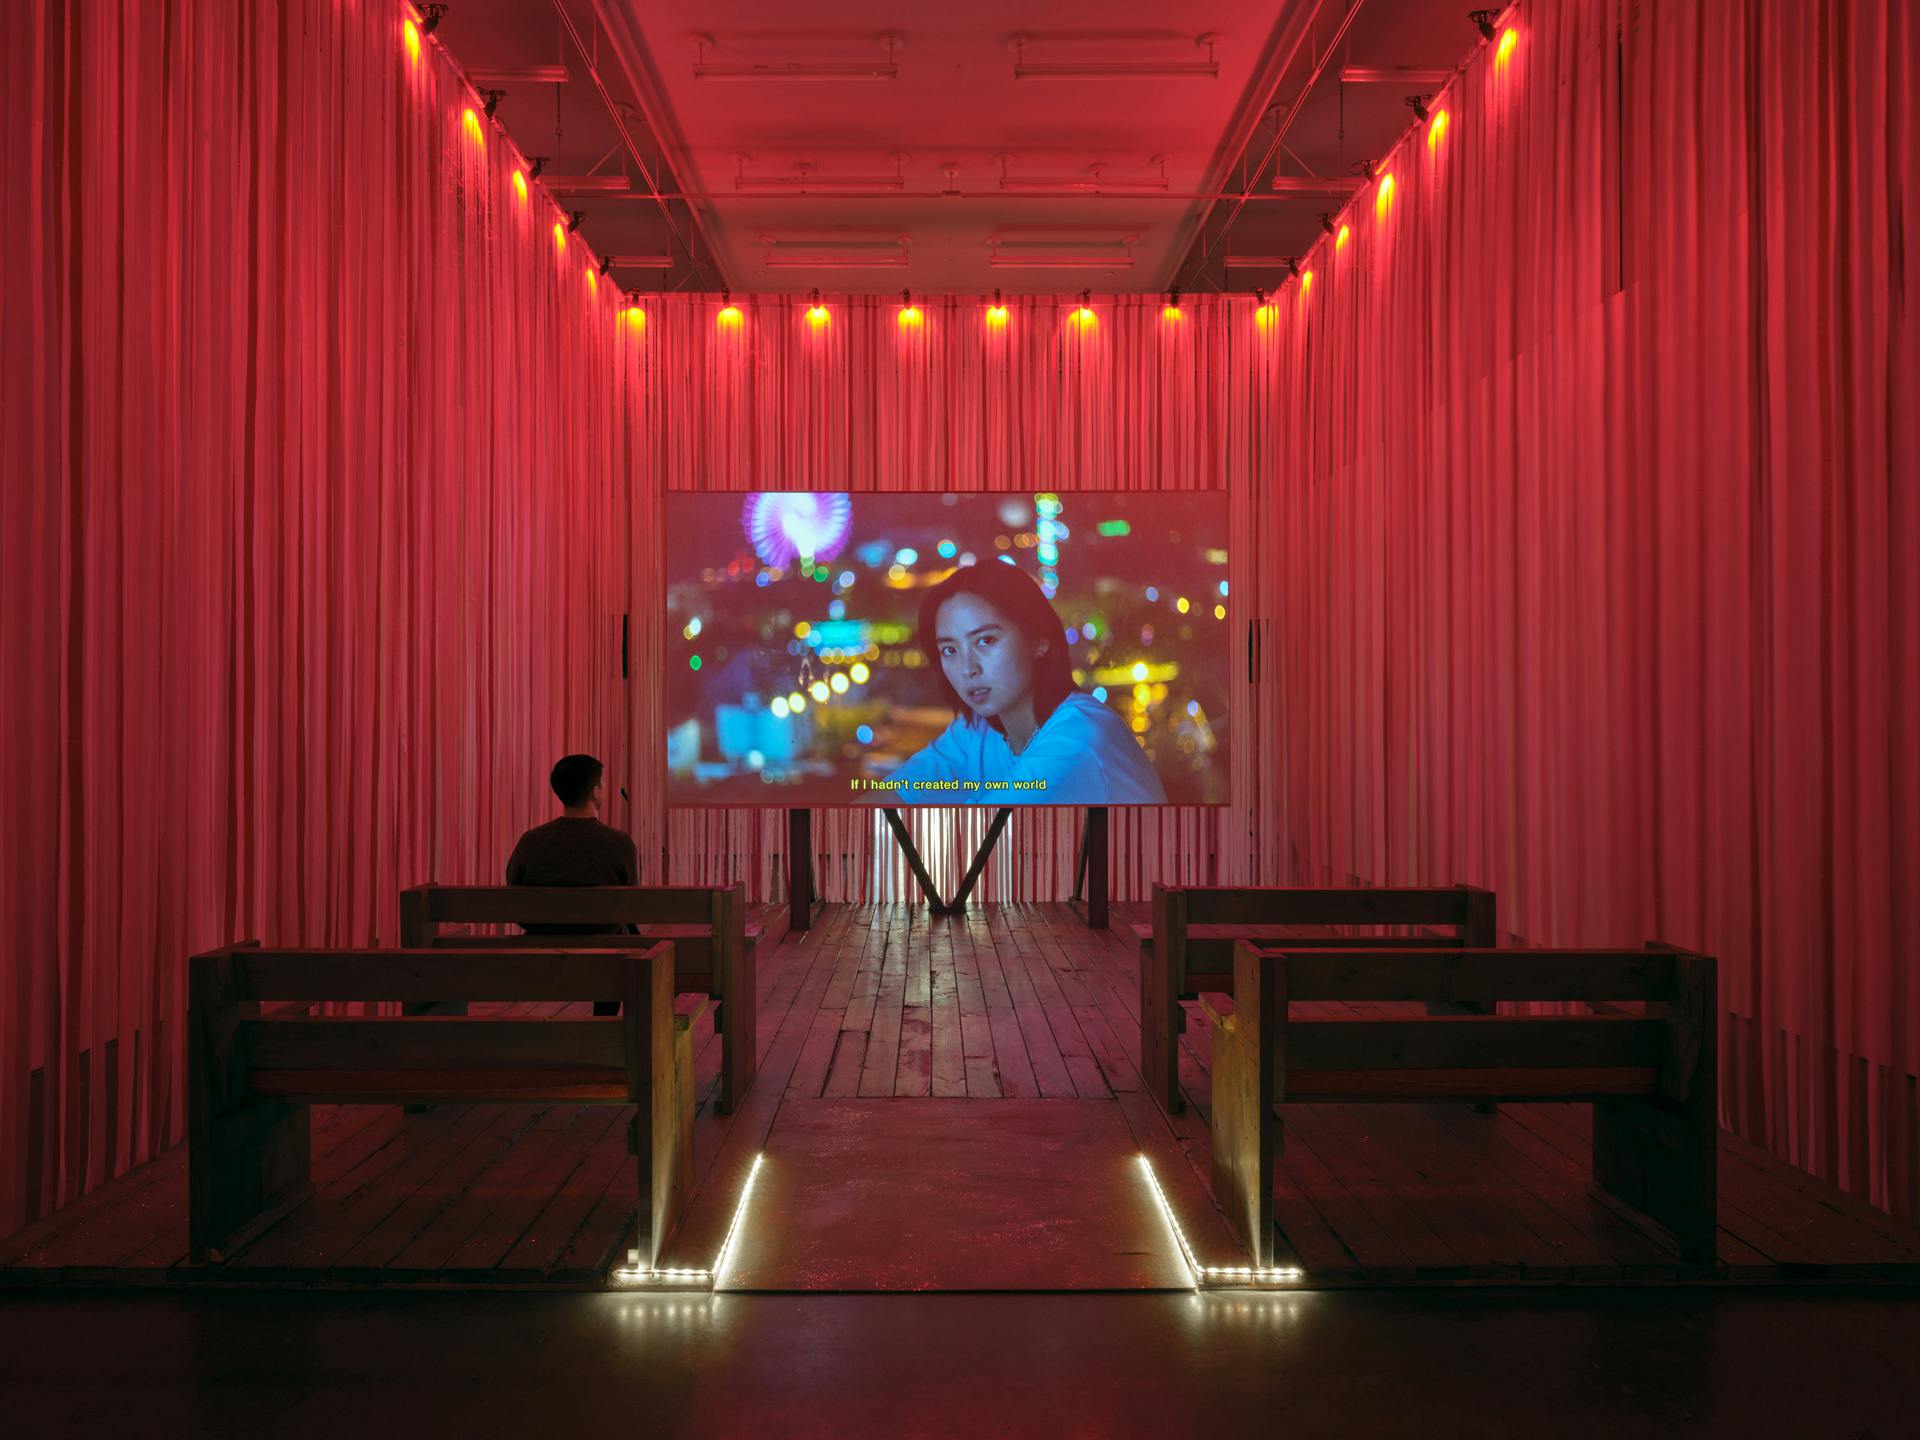 Two rows of benches face a screen in a room with pink and red ribbons walls. Onscreen, a woman faces the viewer with the text caption If I hadn’t created my own world at the bottom of the screen. 